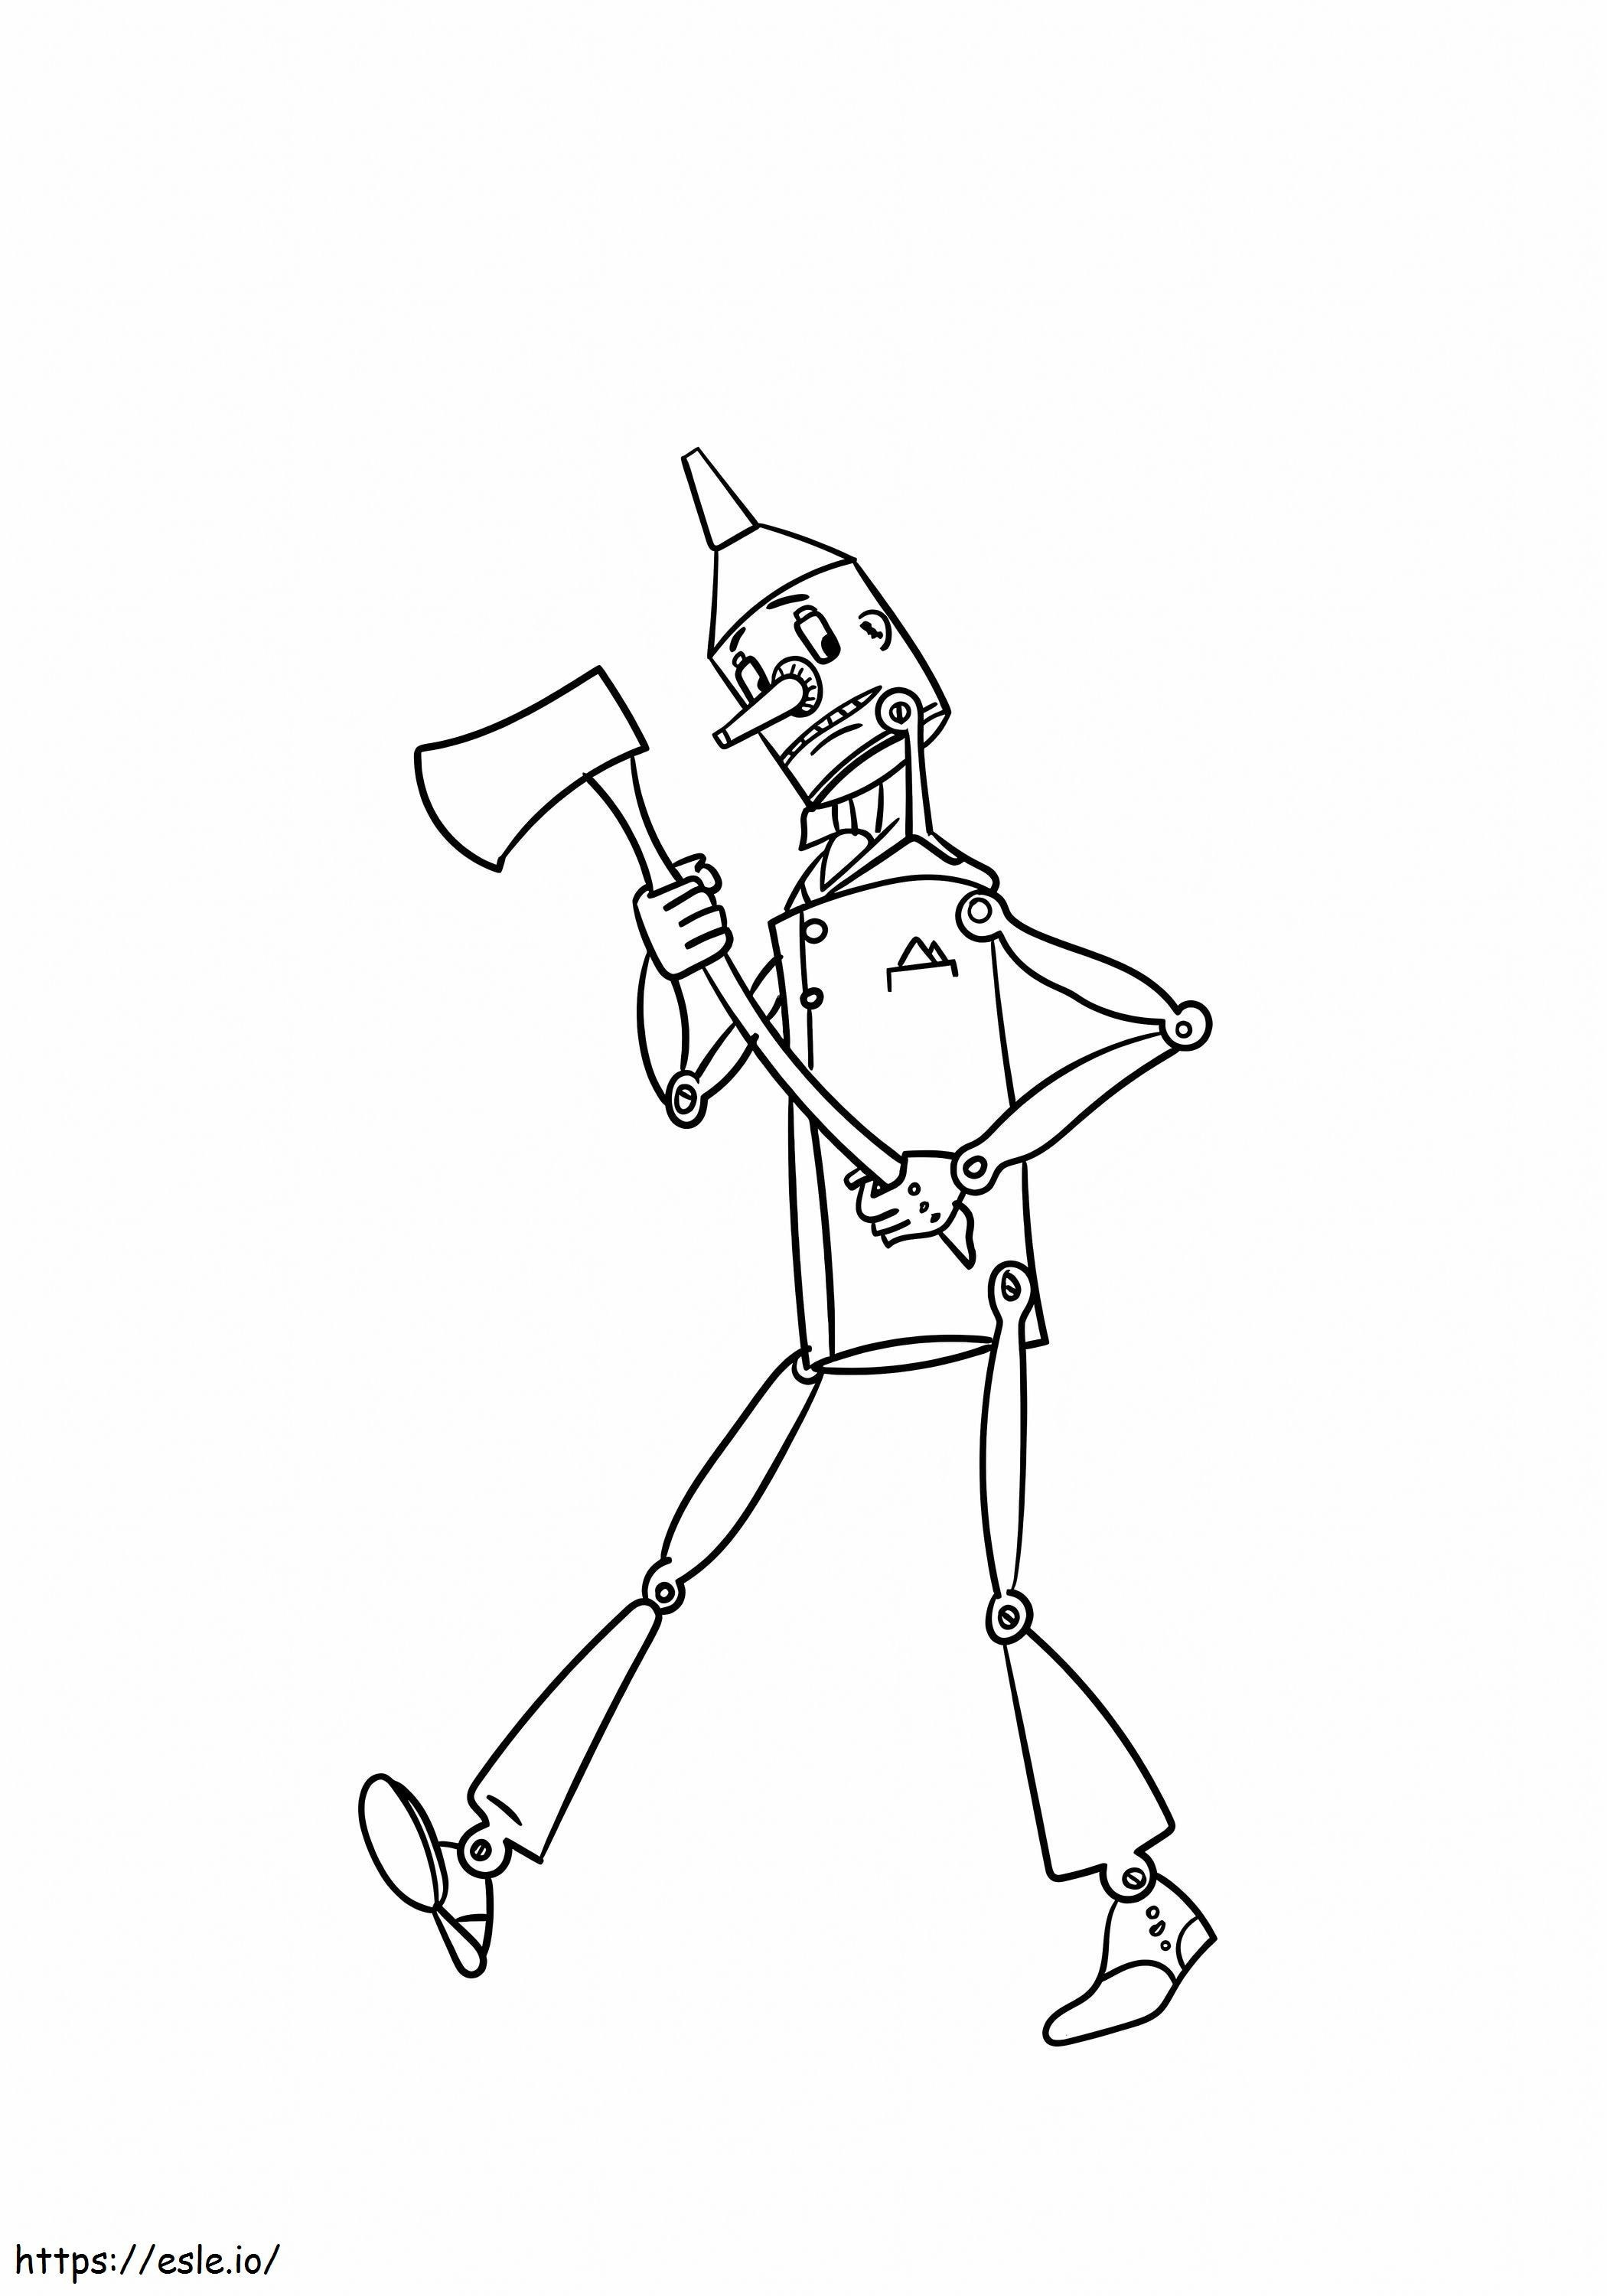 The Tin Man coloring page